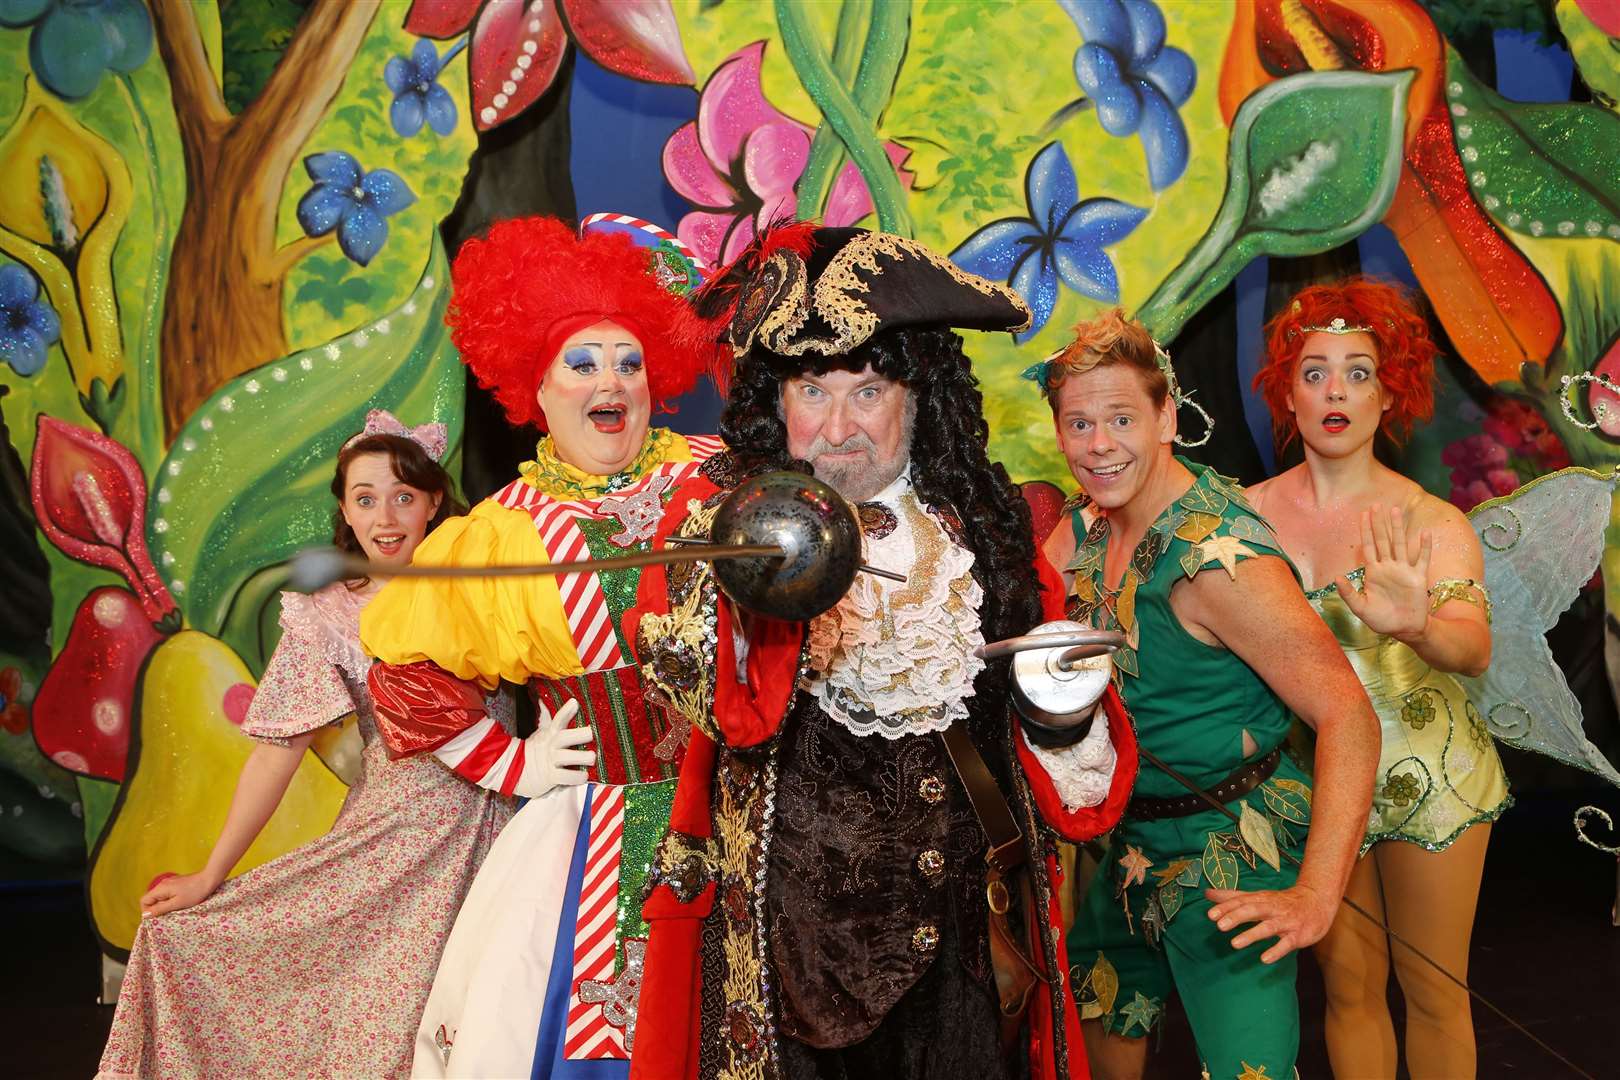 Panto launch for Peter Pan..Pictured are Jenny Huxley-Golden (Wendy), Quinn Patrick (Mrs Smee), Paul Bradley (Captain Hook), Lloyd Warbey (Peter Pan) & Holly Atterton (Tinkerbell).Assembly Hall Theatre, Tunbridge Wells..Picture: Andy Jones. (23615720)